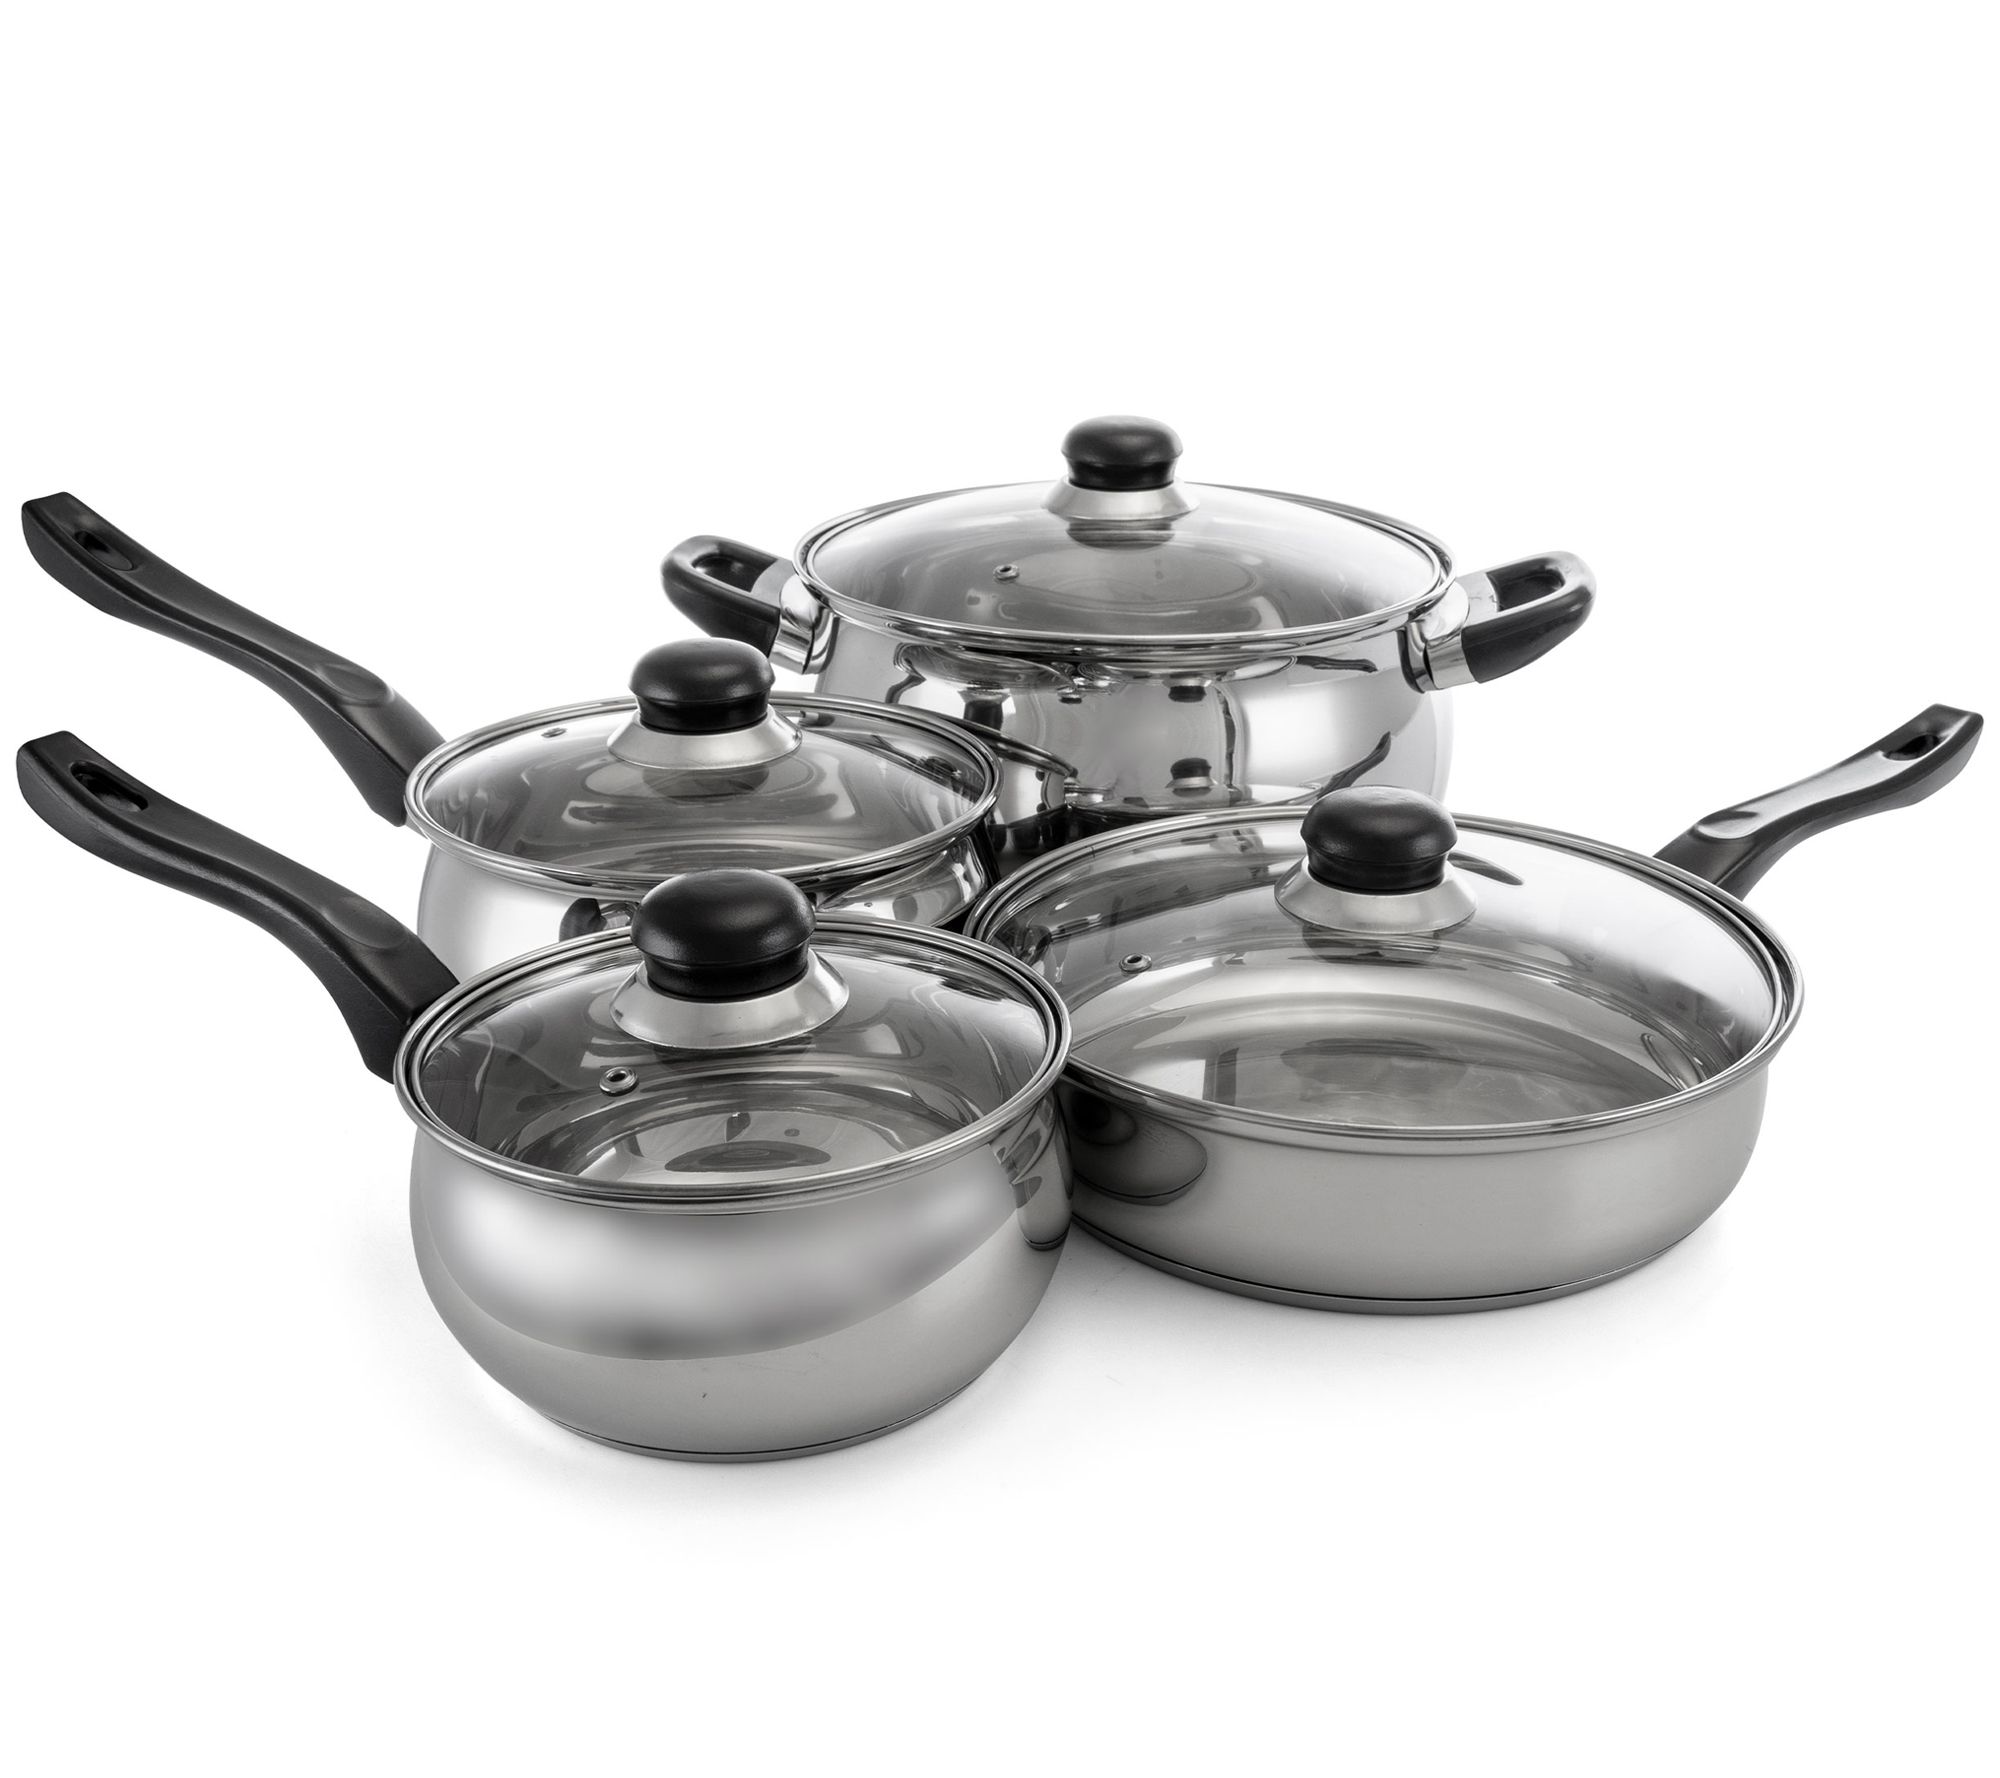 18/8 Stainless Steel Pots And Pans Set Nonstick With Lids8 Piece